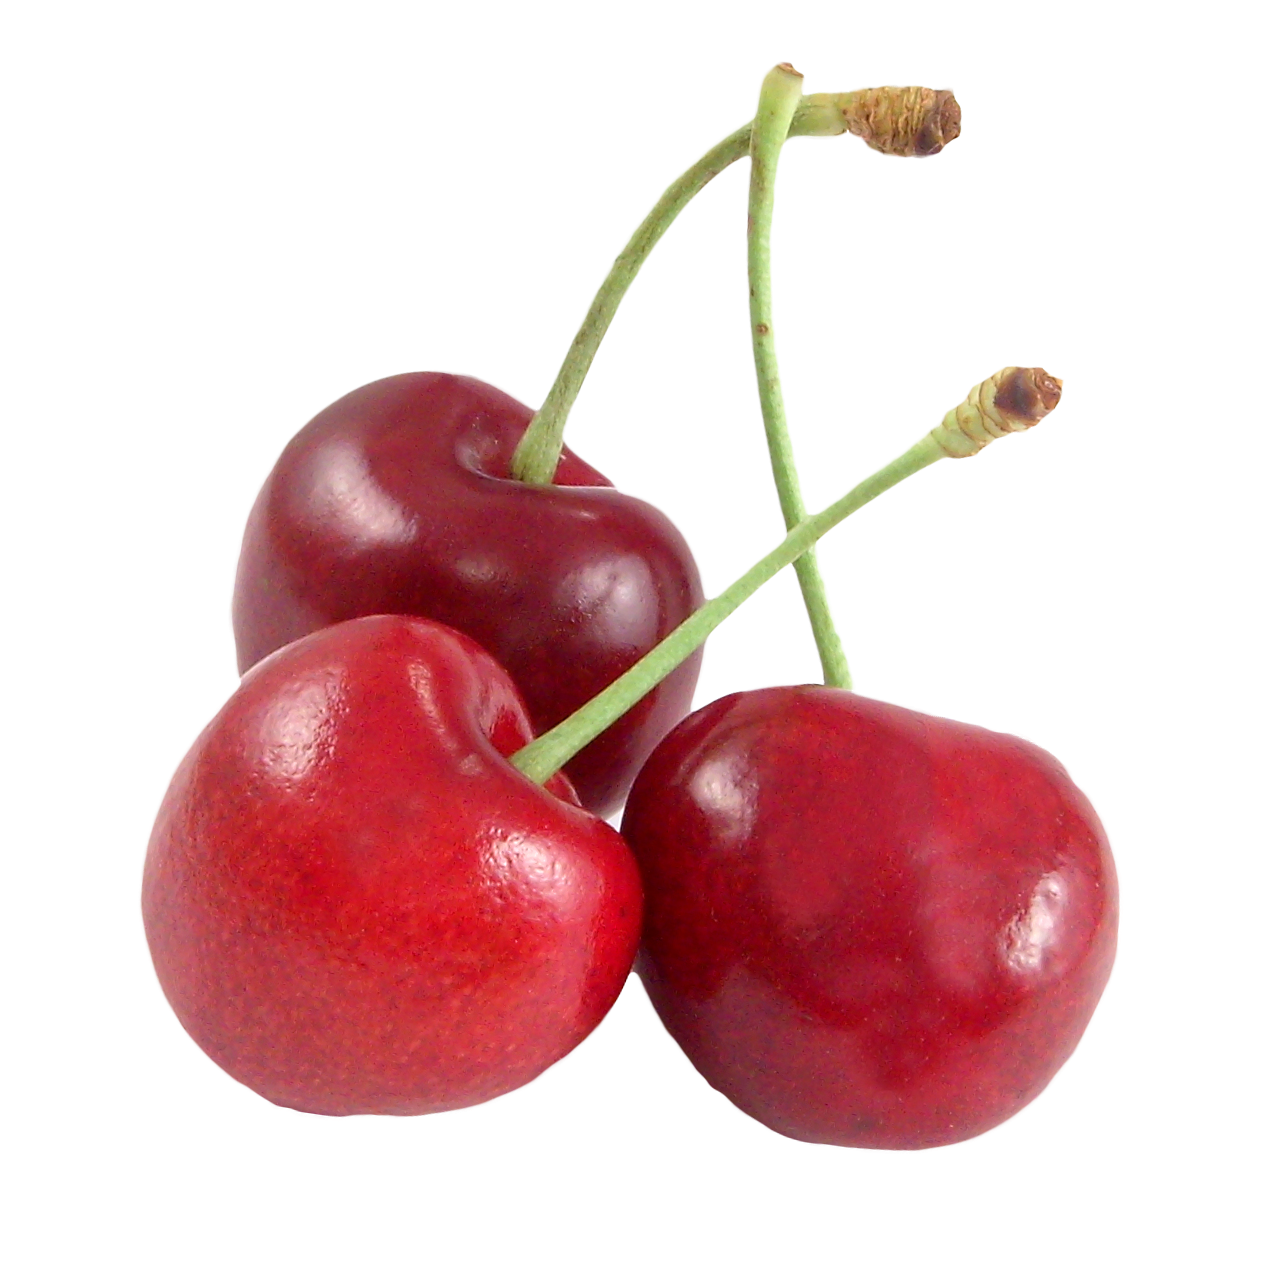 Download Cherry Fruit File HQ PNG Image in different resolution | FreePNGImg